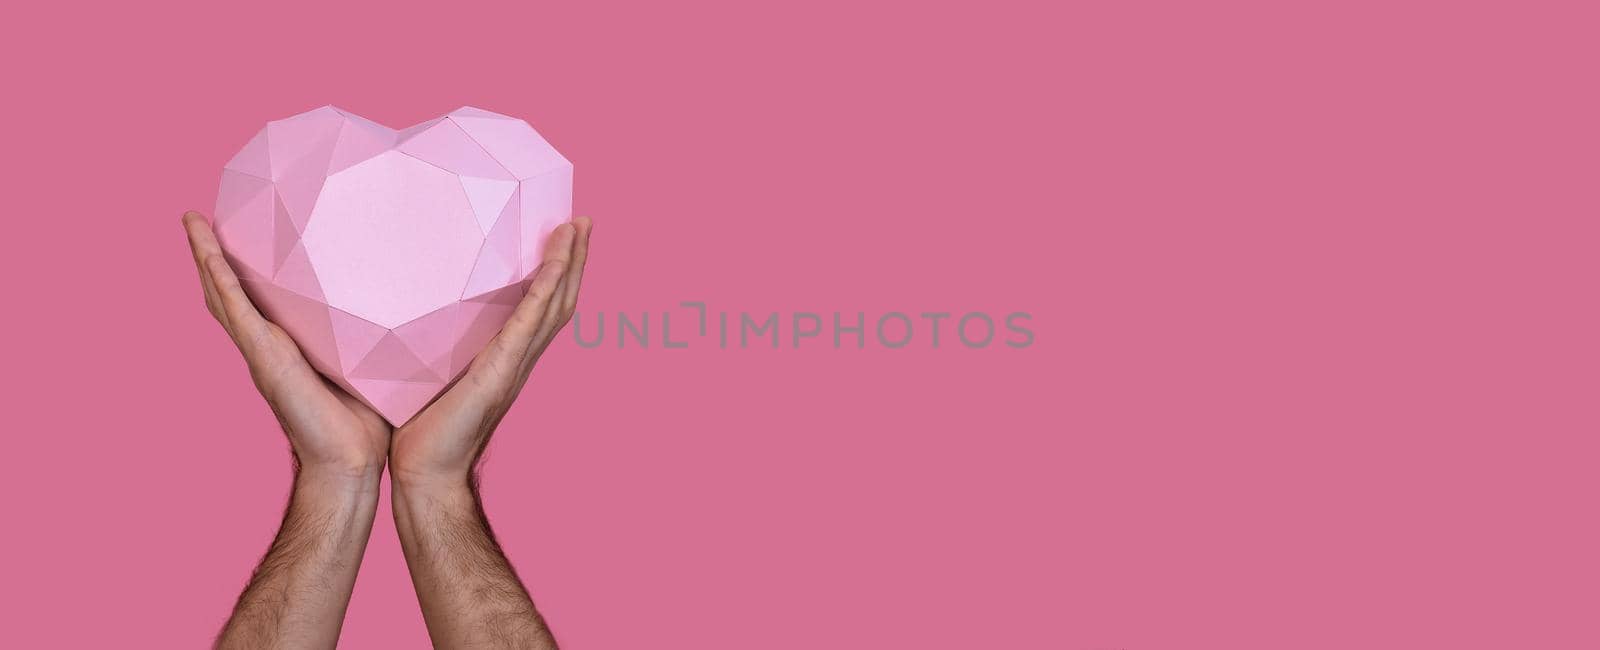 Polygonal three-dimensional pink heart made of paper in the hands of a man. On a pink background. Banner.  by ja-aljona